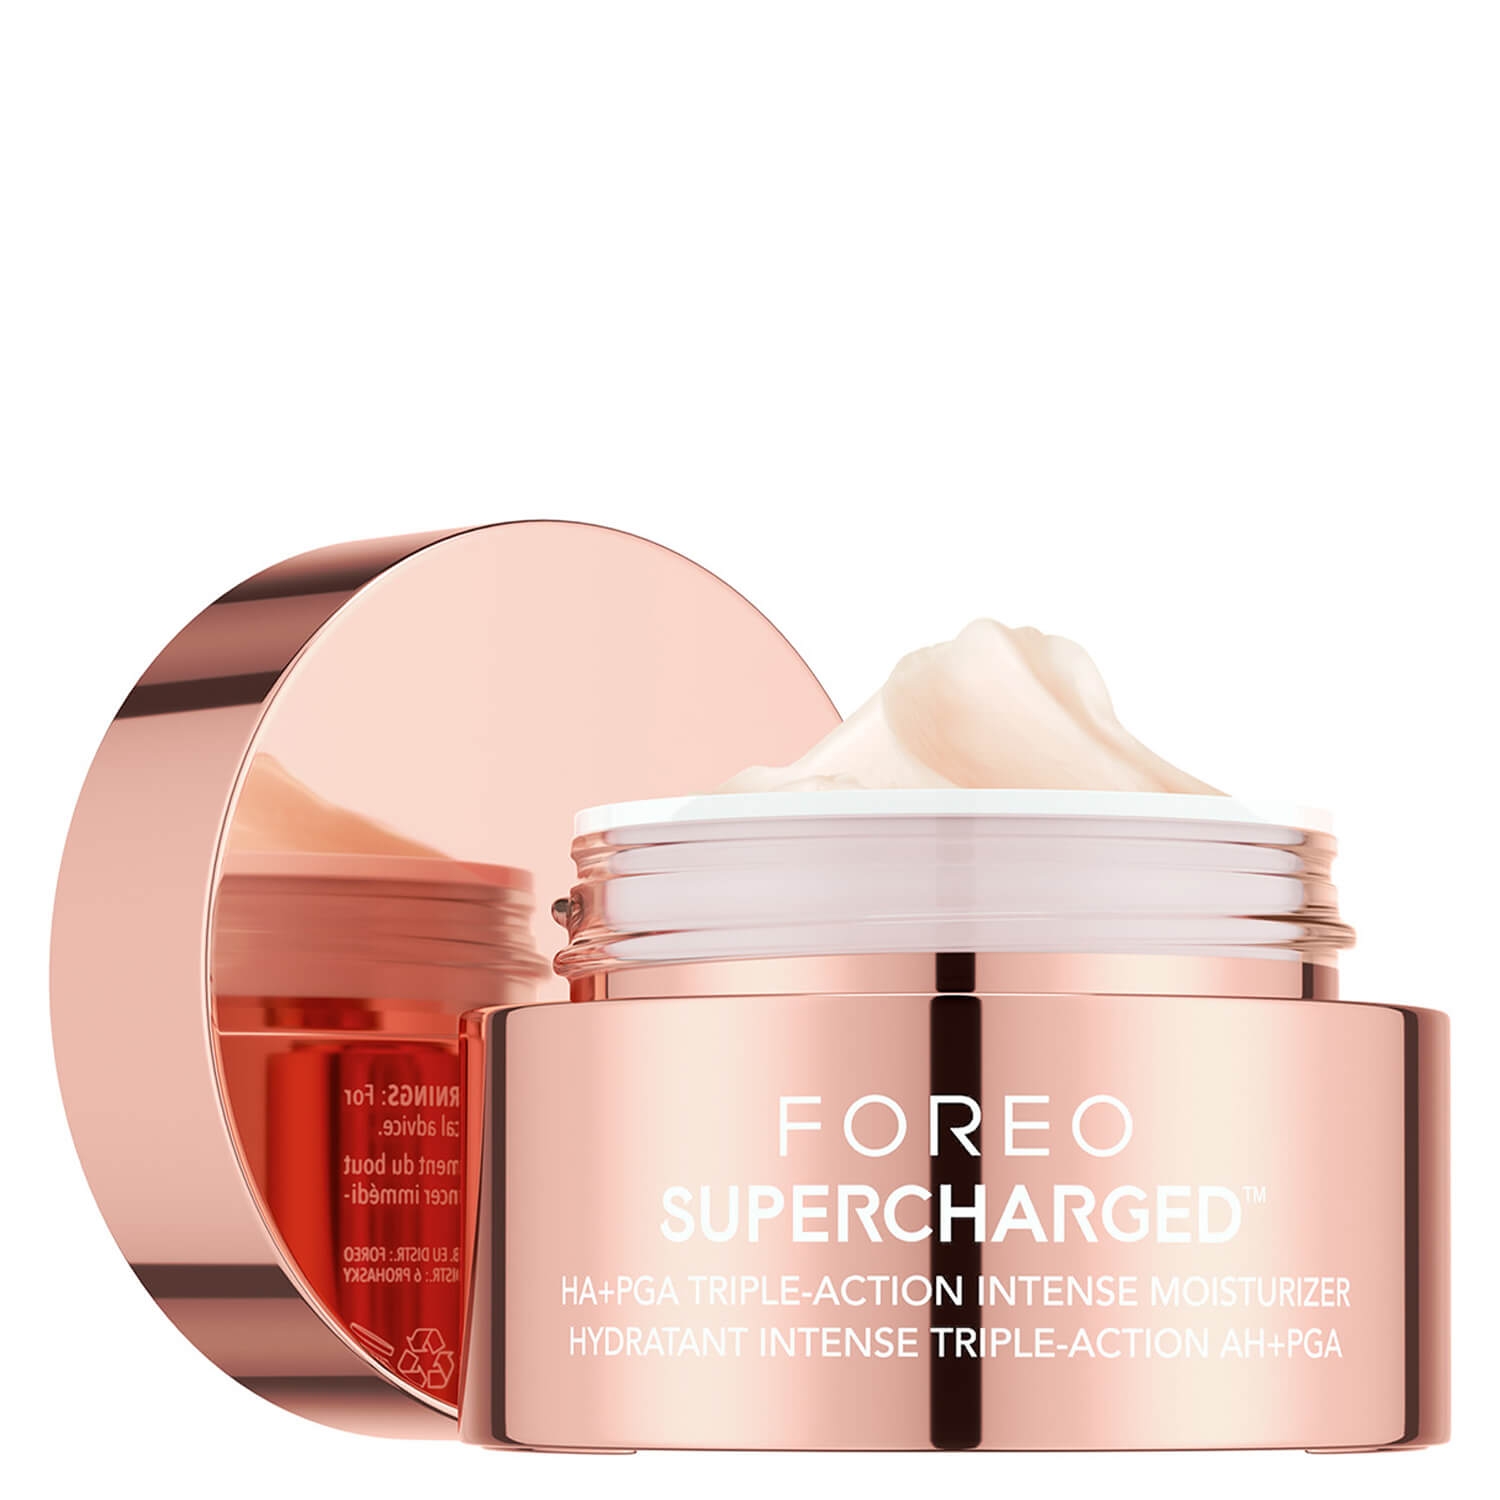 Product image from SUPERCHARGED™ - HA+PGA Triple-Action Intense Moisturizer